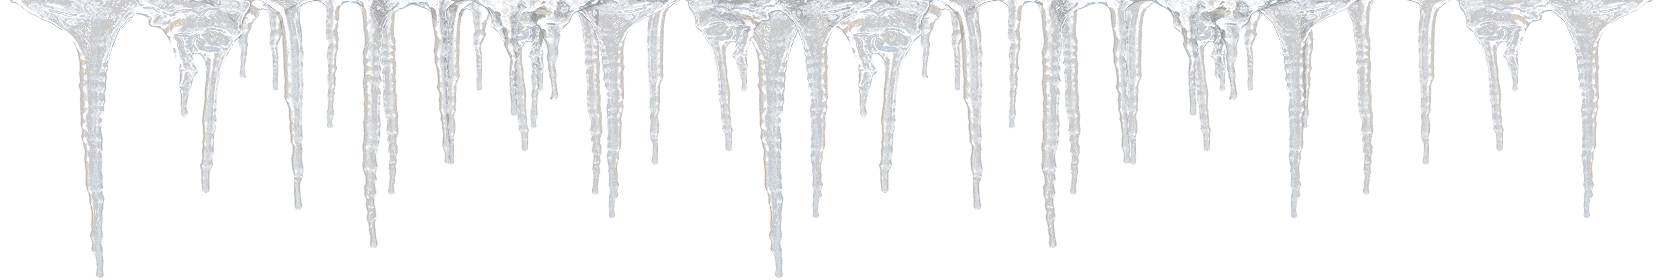 Icicles PNG free image download, icicle PNG